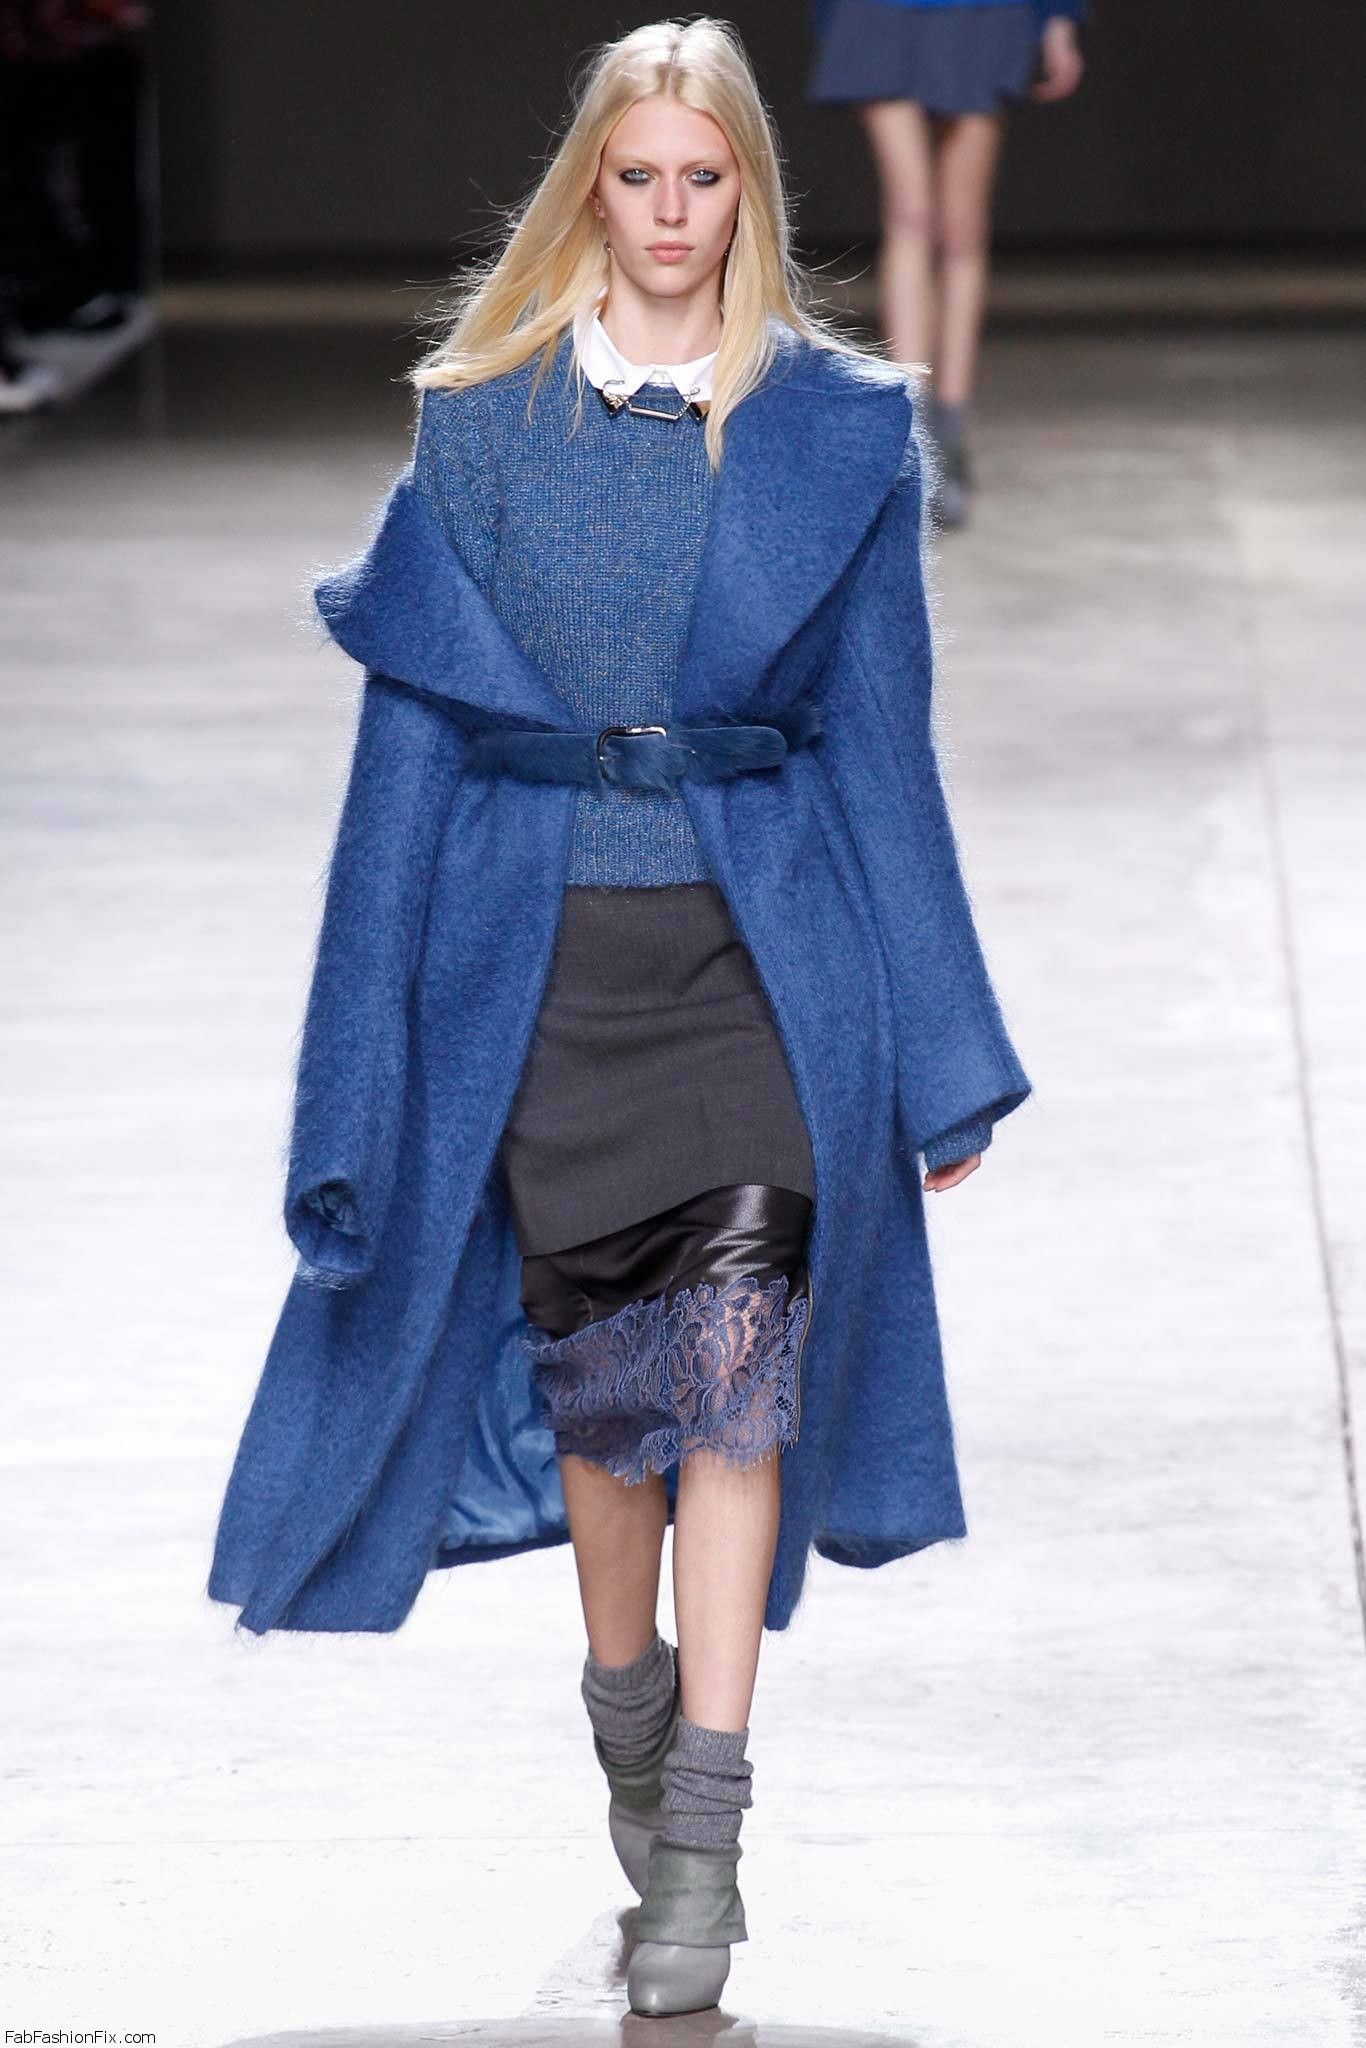 Topshop Unique fall/winter 2014 collection – London fashion week | Fab